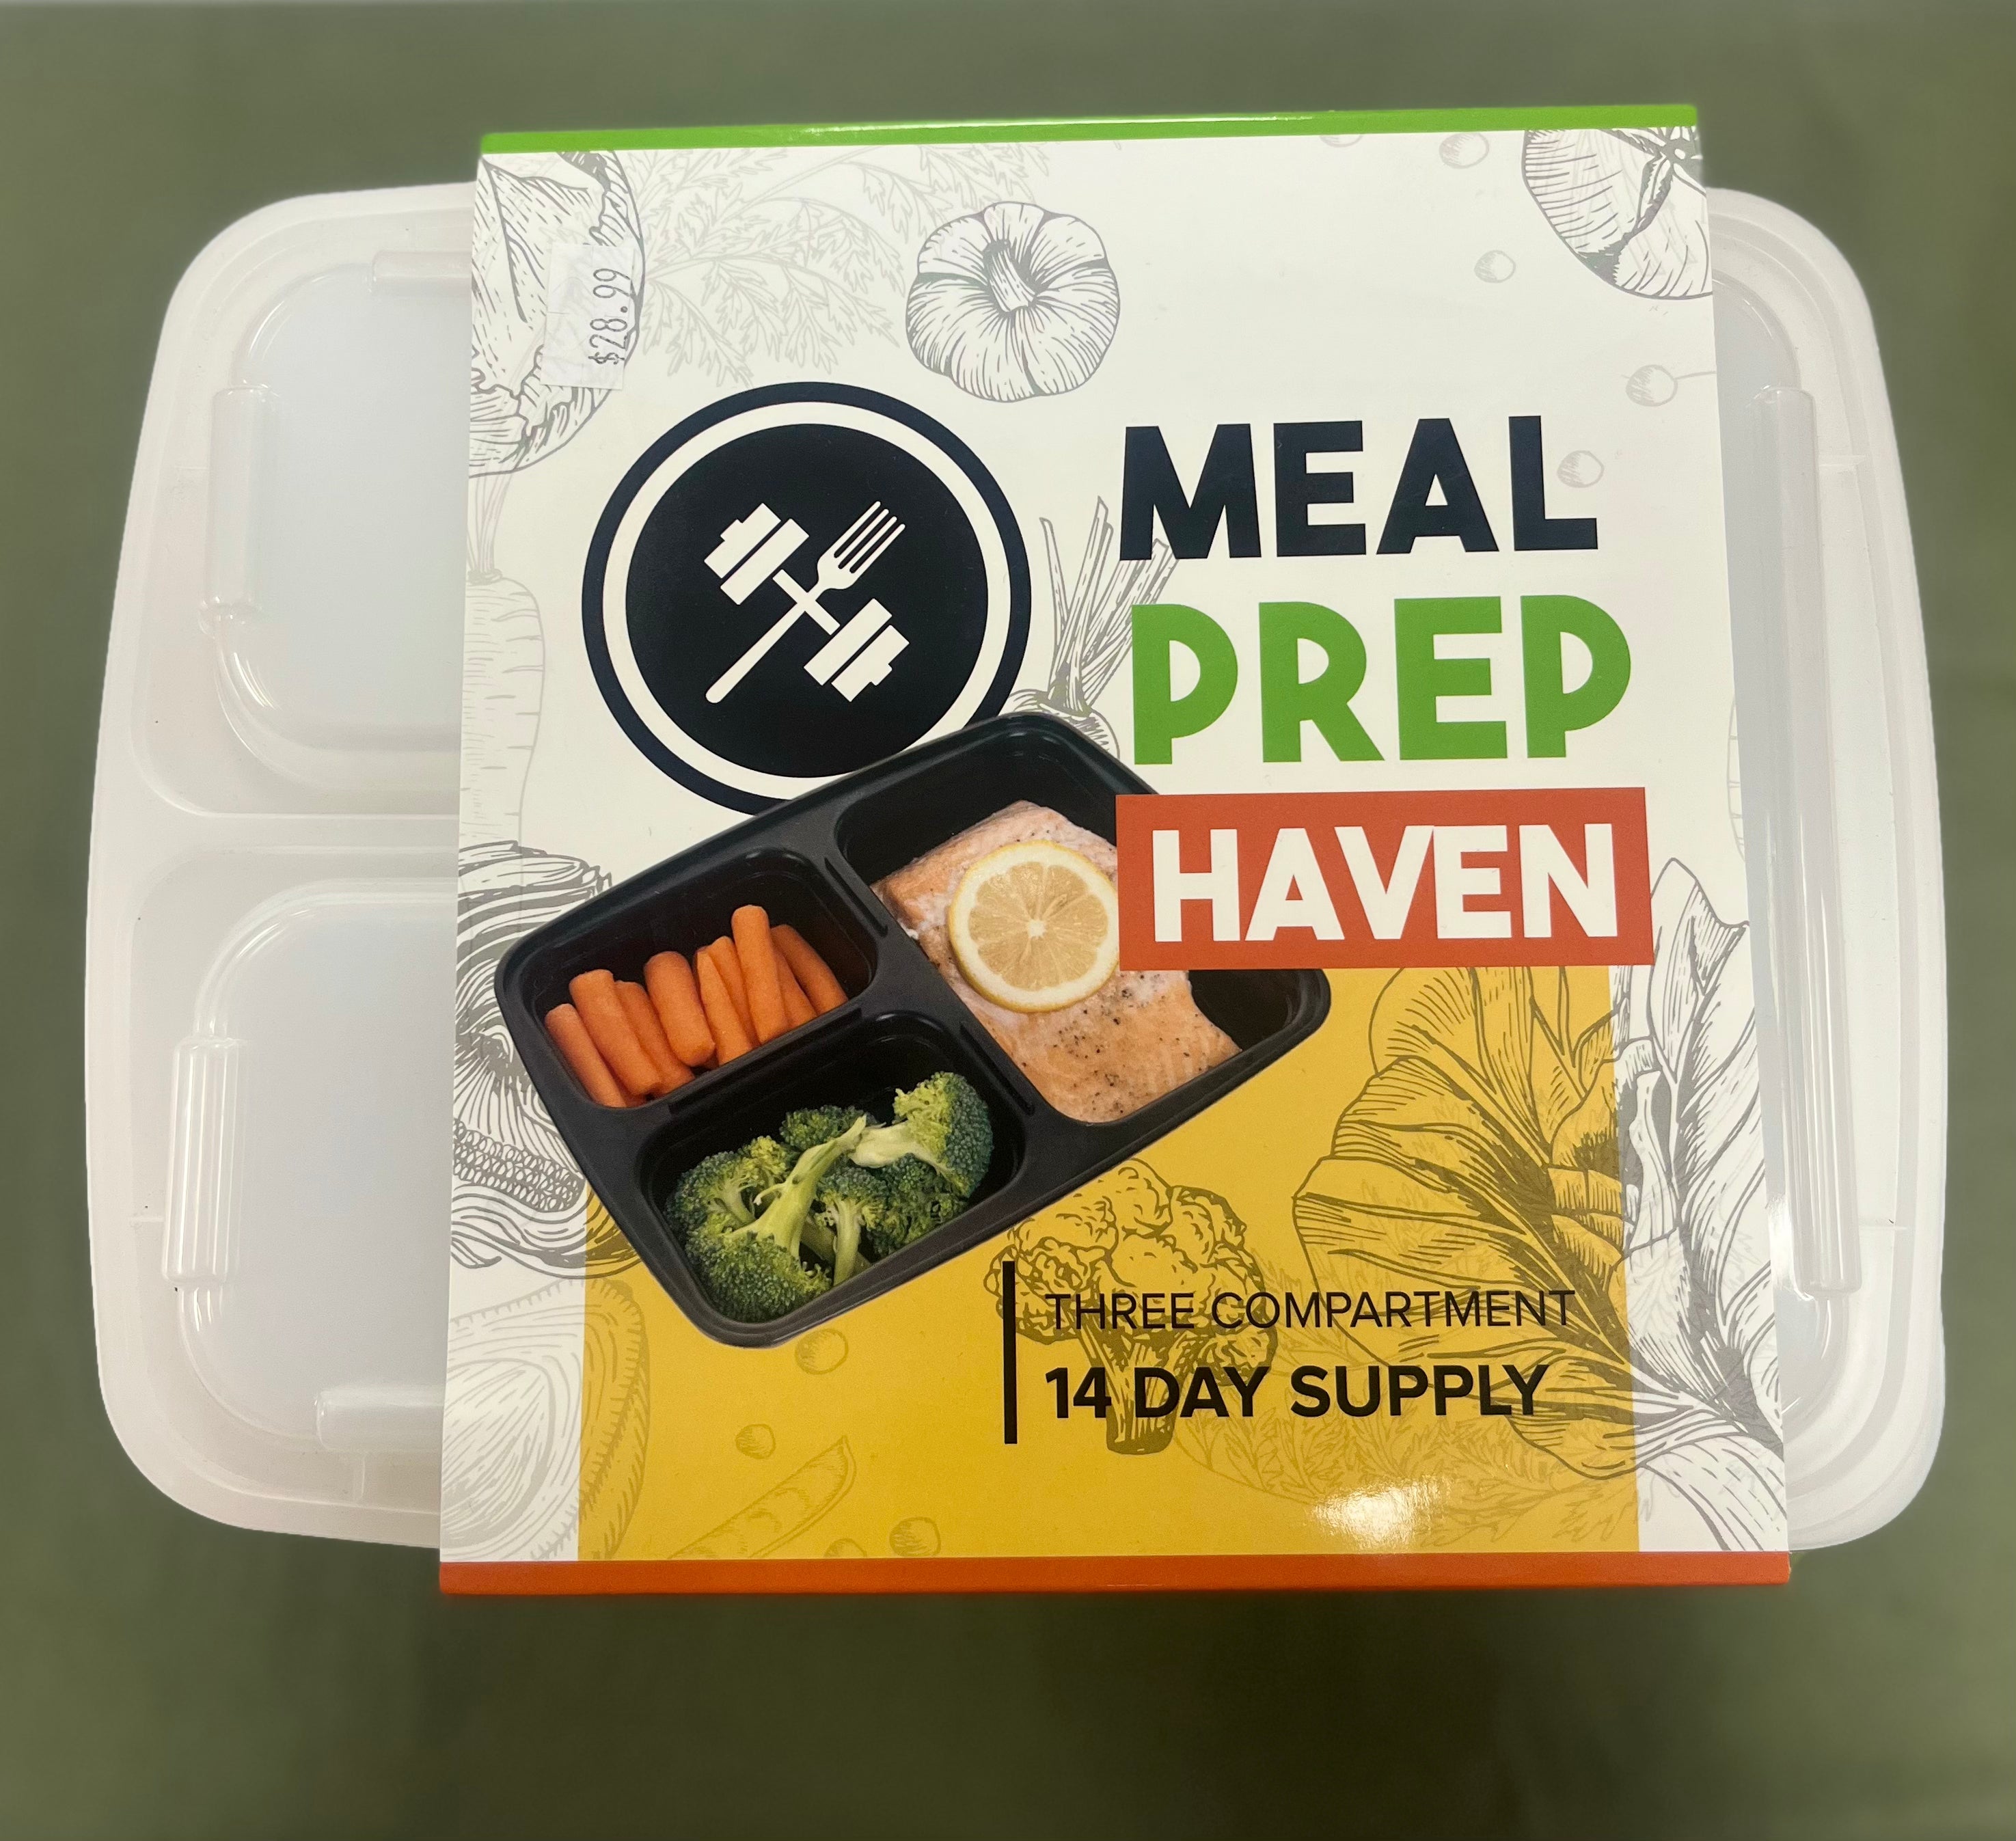 discounted meal prep supplies